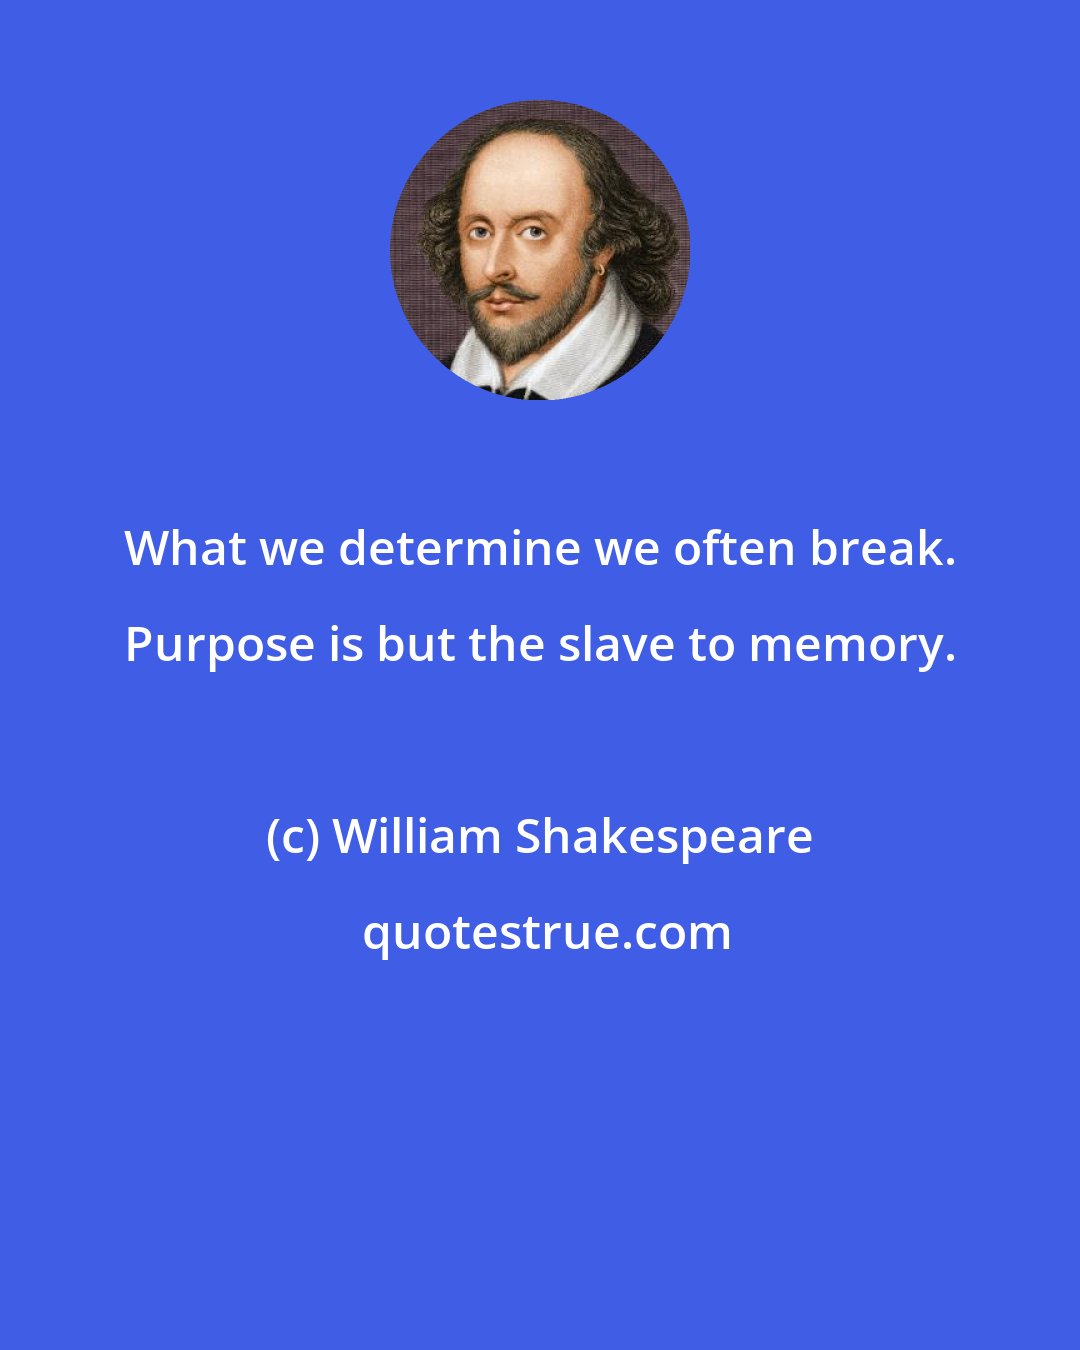 William Shakespeare: What we determine we often break. Purpose is but the slave to memory.